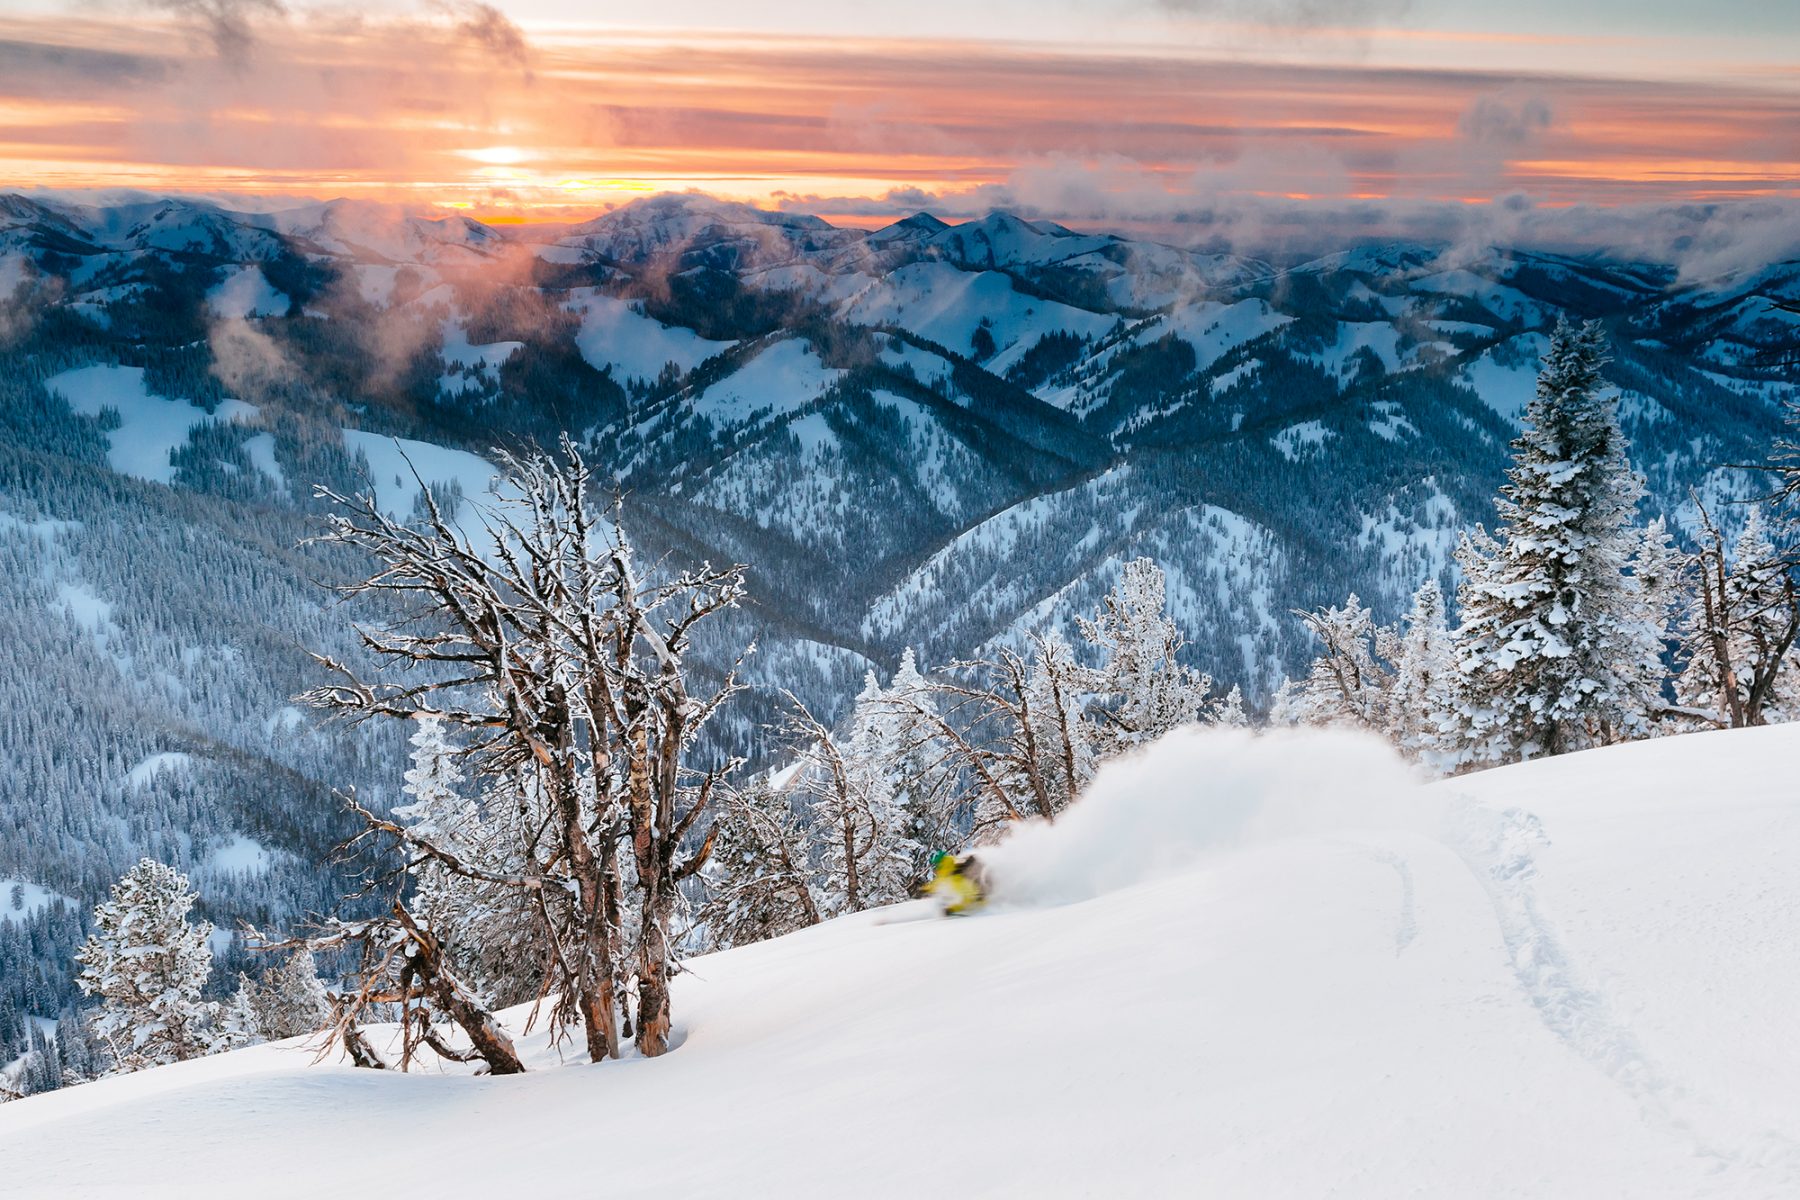 skier in mountains - things to do in jackson hole